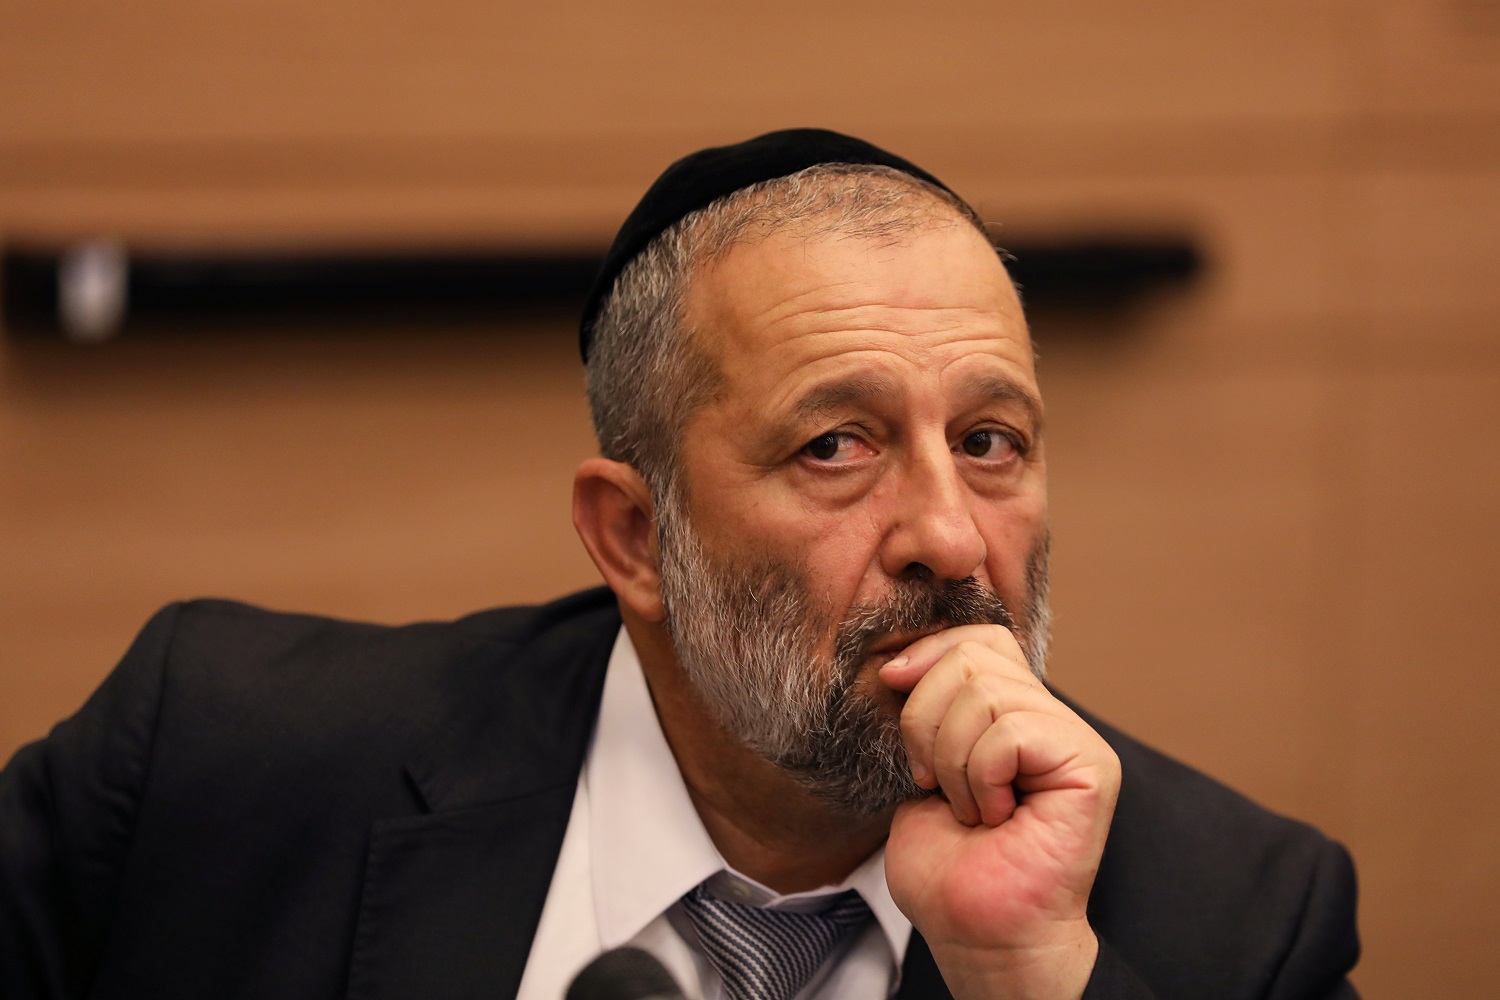 Ariye Deri, leader of the Shas party, attends a meeting at the Knesset in September 2017 (Reuters)